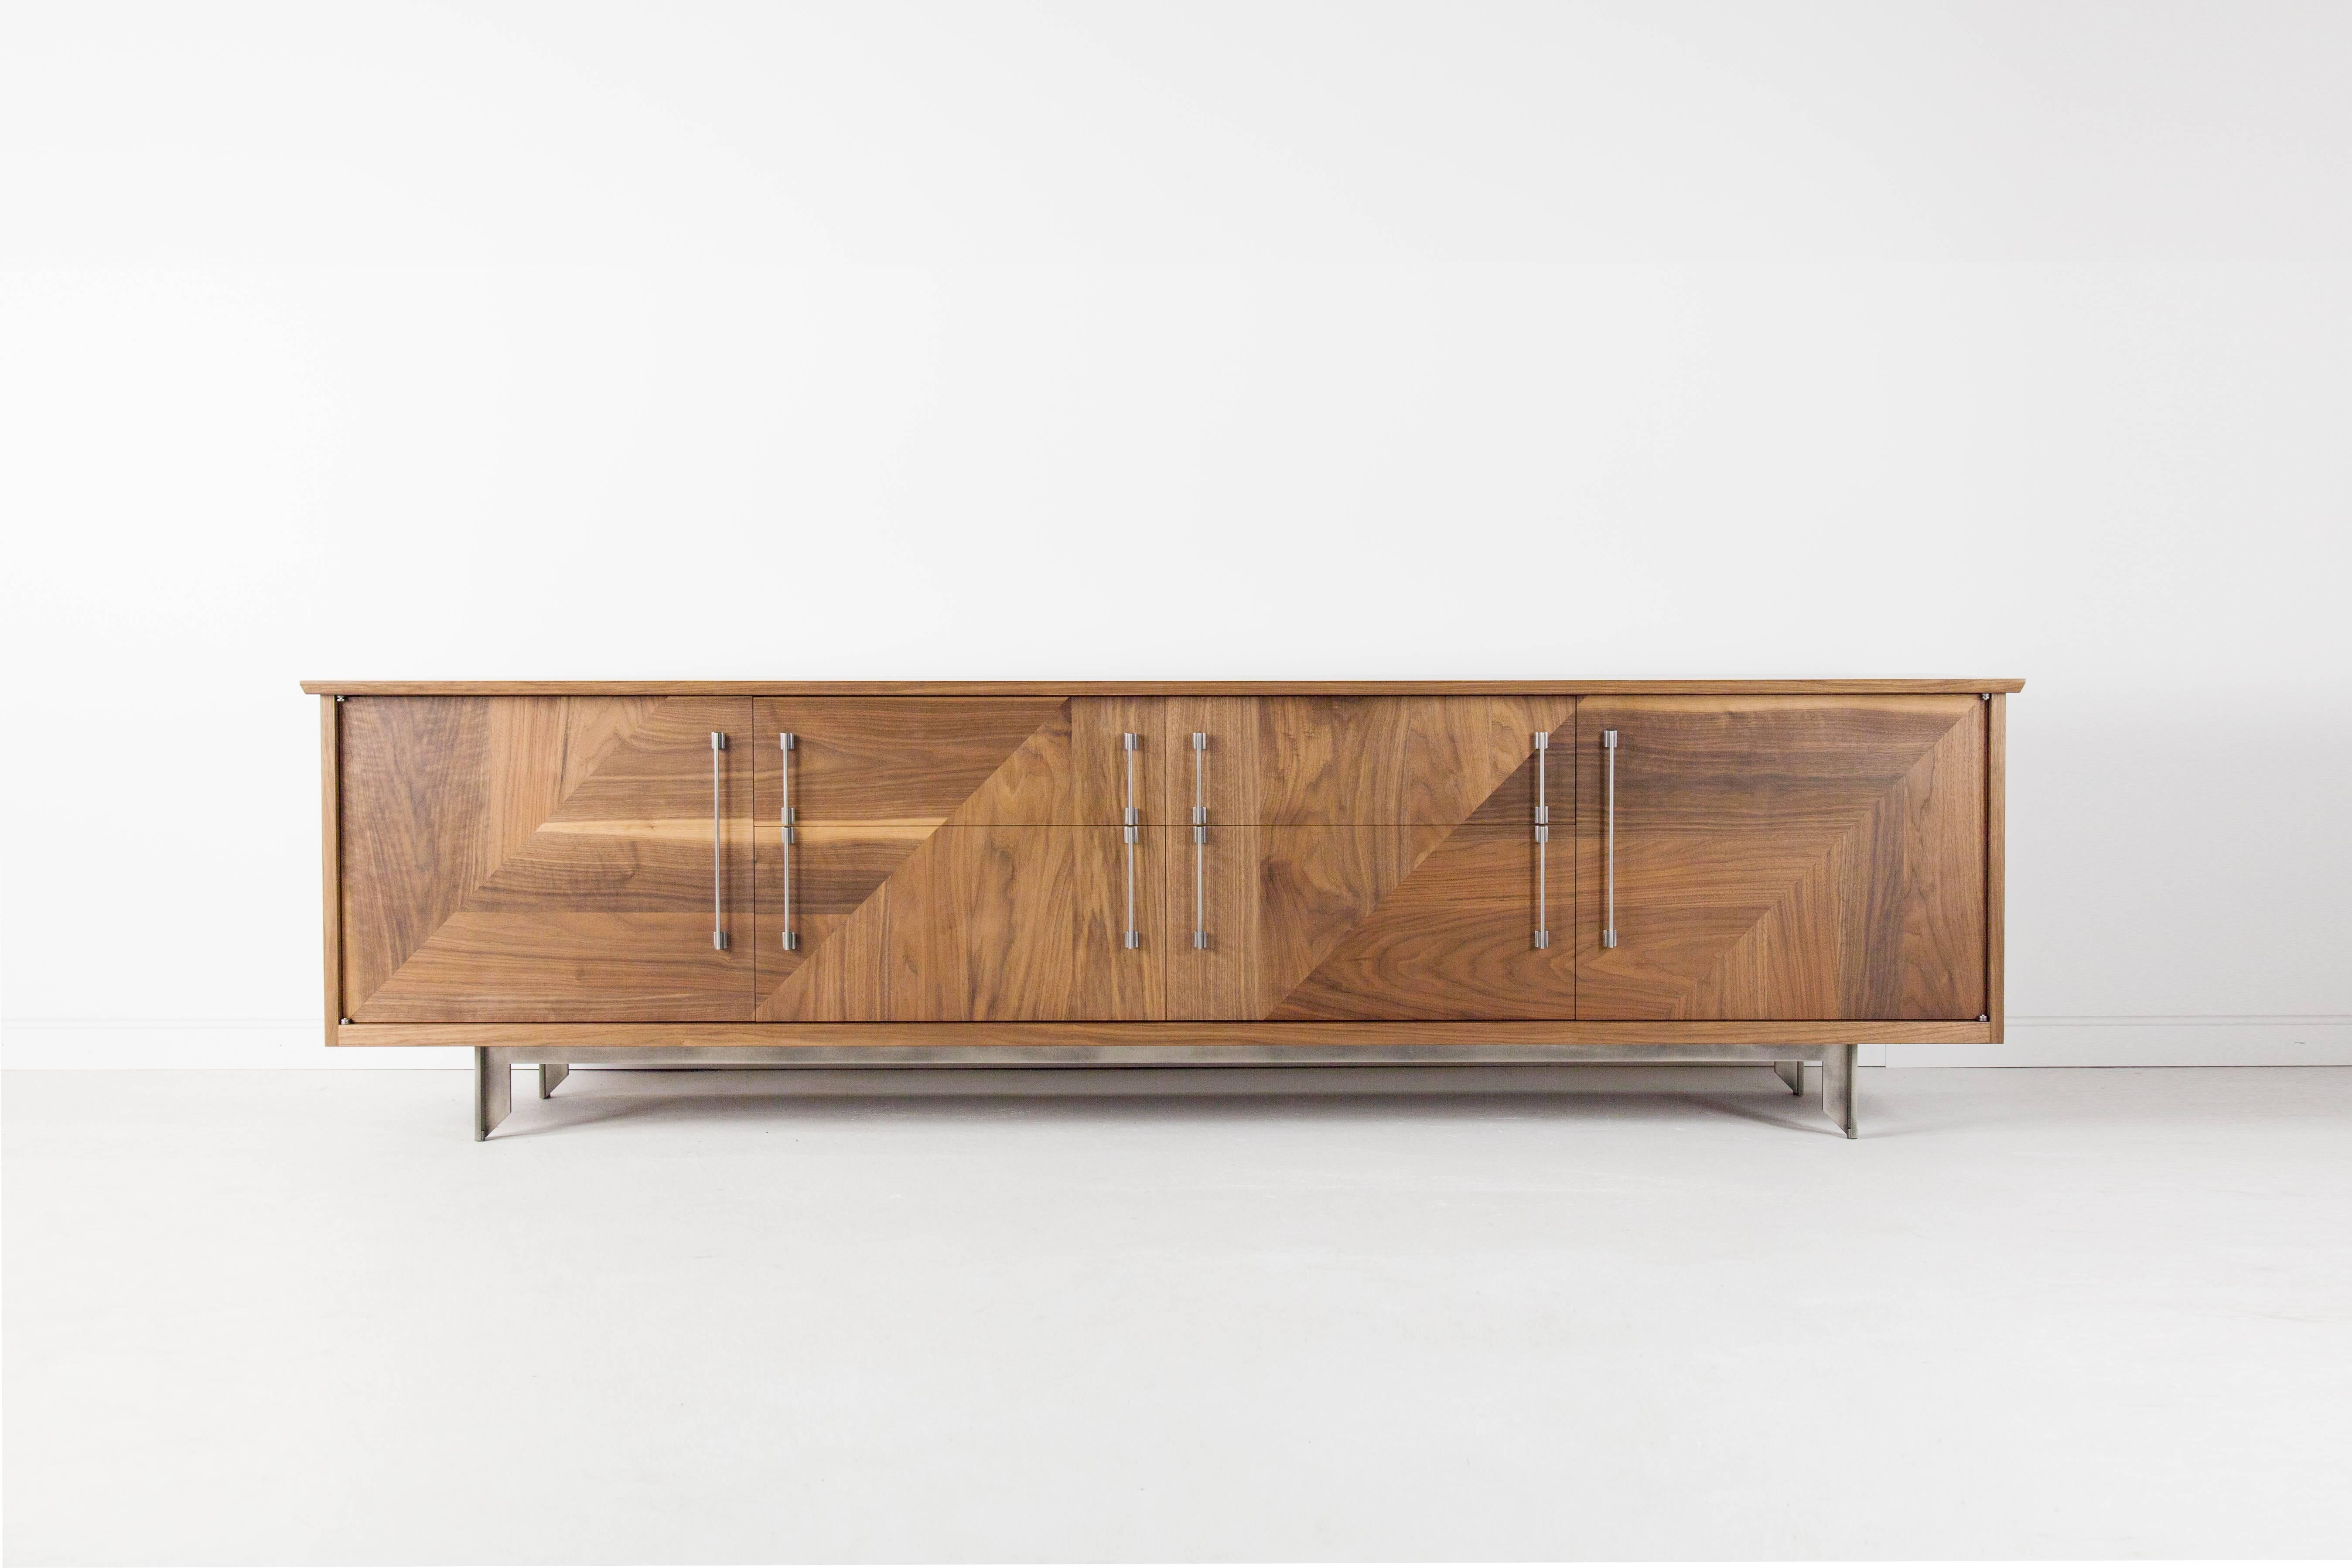 The traditional form of the Riley Sideboard frames the patterned imagery held by the doors and drawer fronts. The sideboard has studio-machined hardware and hand-patterned woodwork, as well as soft close drawers and adjustable shelves. Each piece is